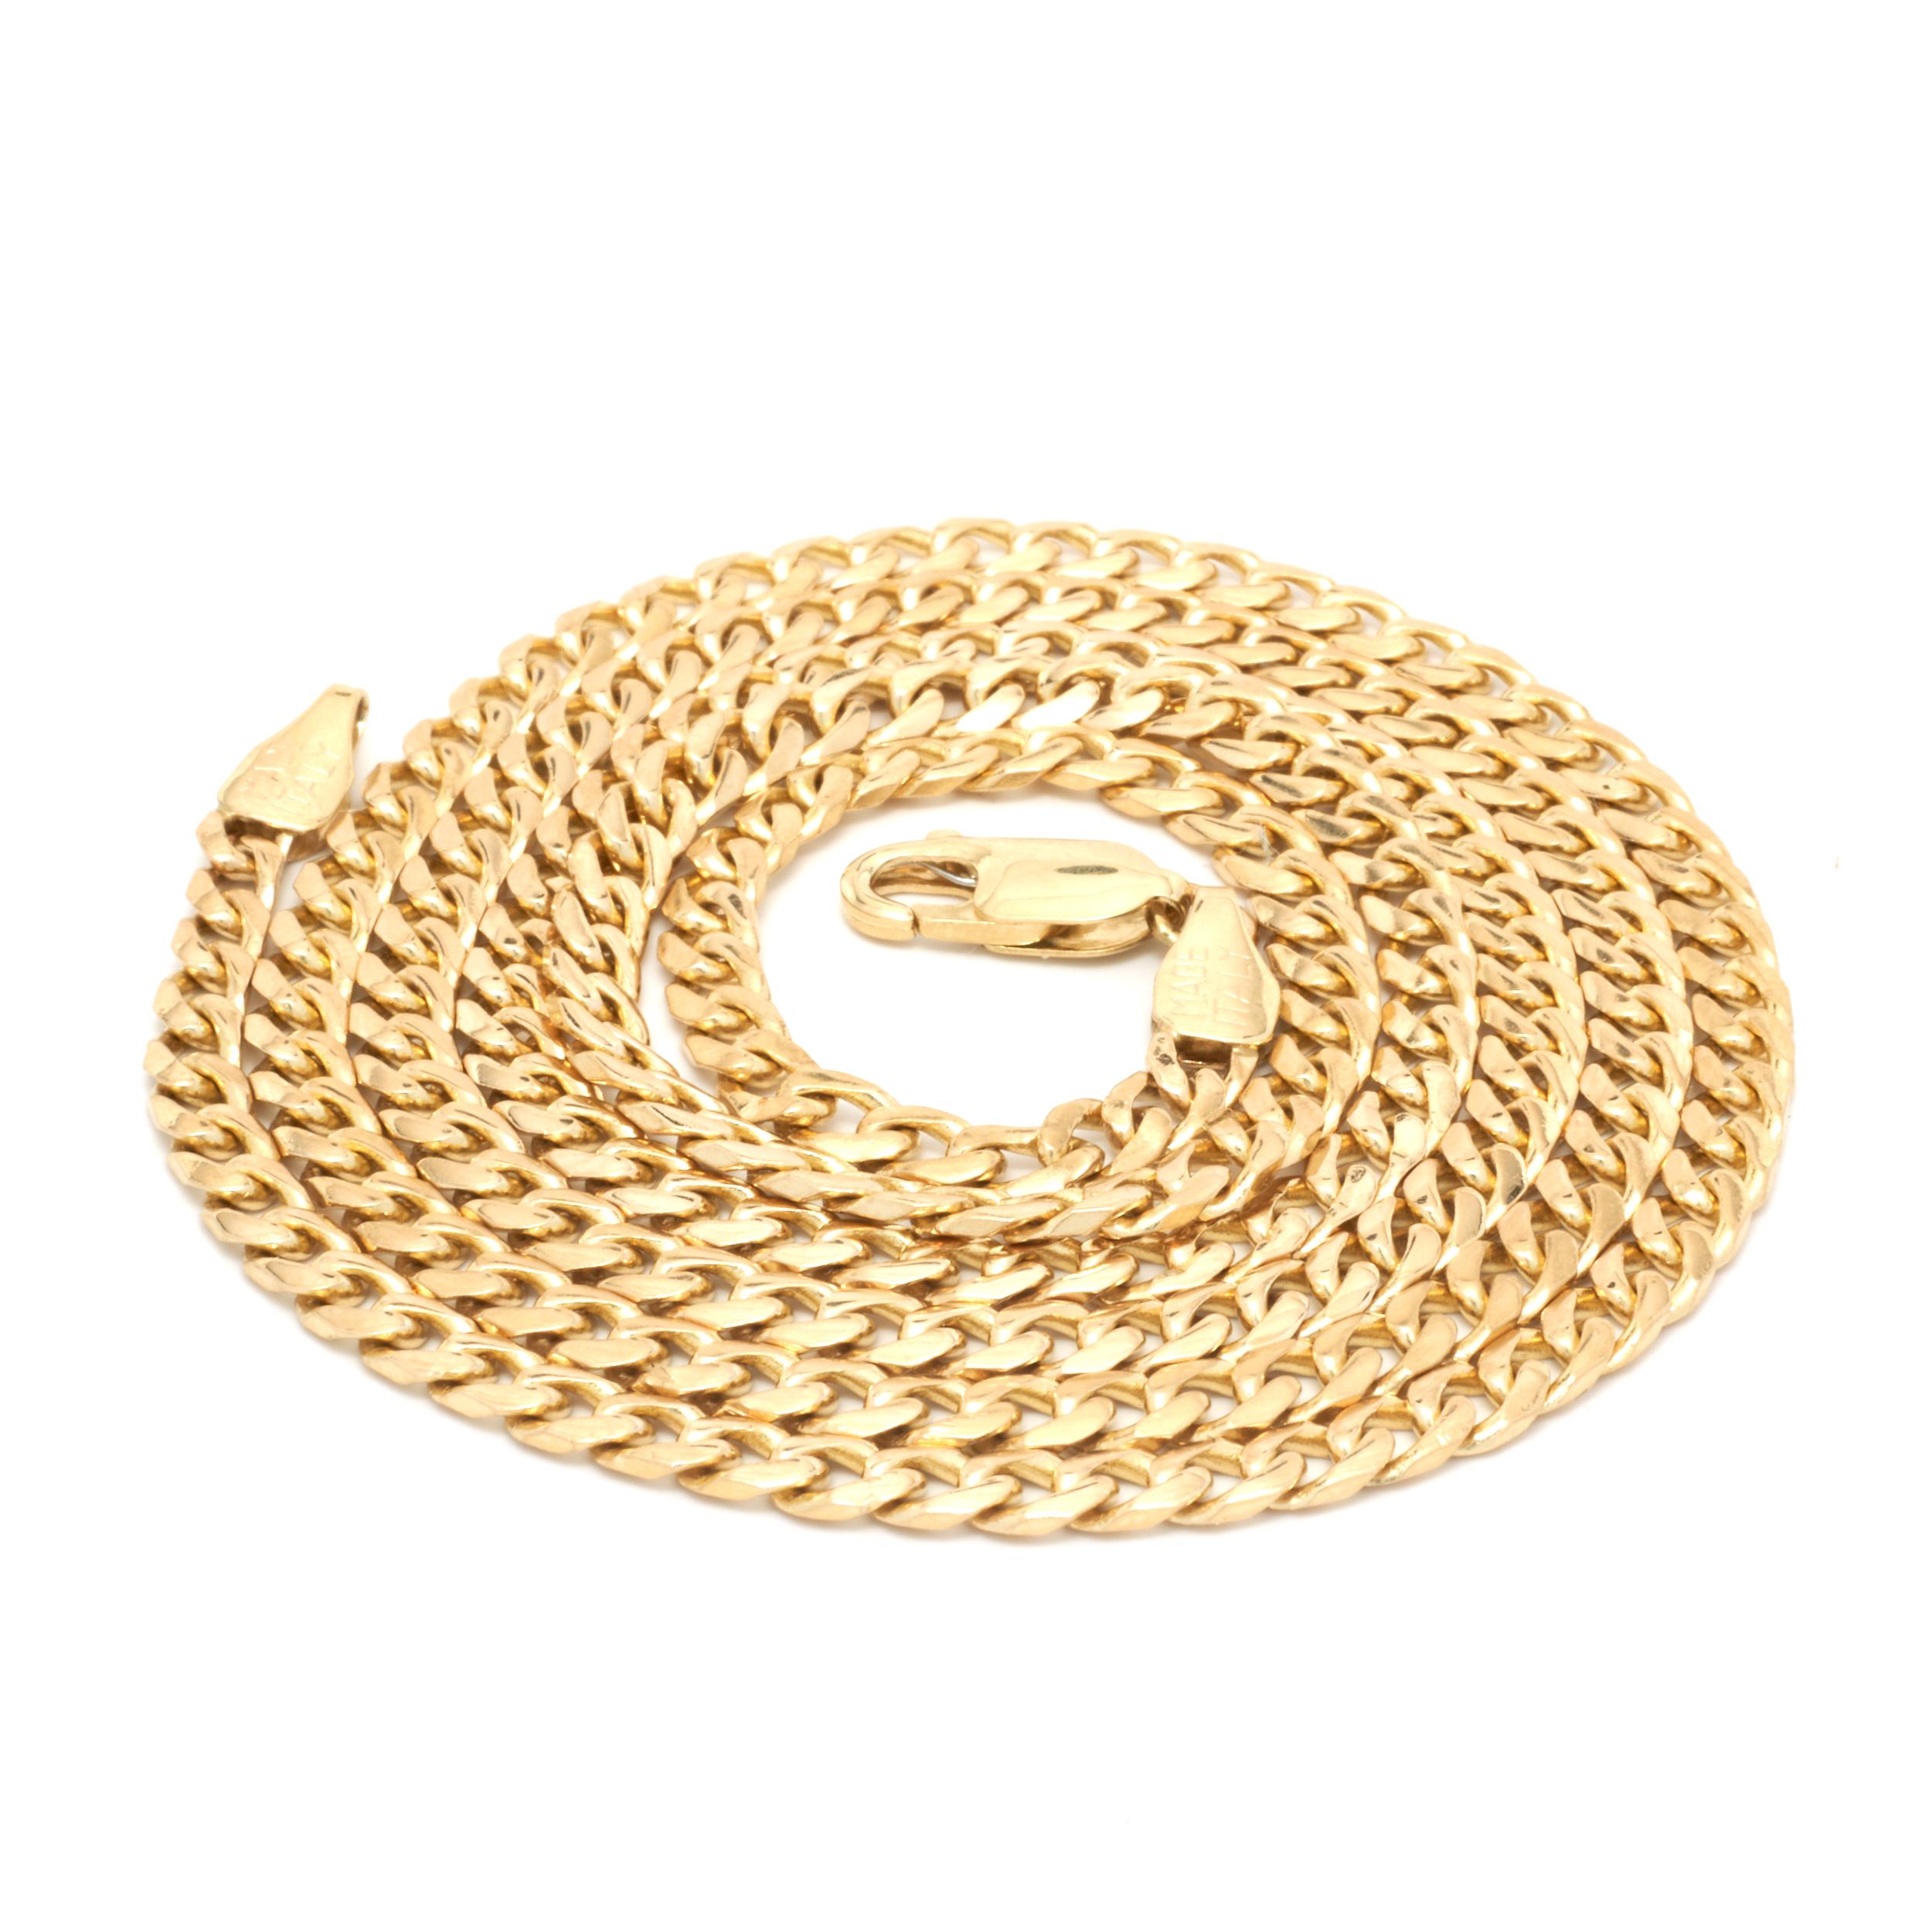 Material: 14K yellow gold
Dimensions: necklace measures 31-inches in length, 4mm wide
Weight: 30.30 grams
